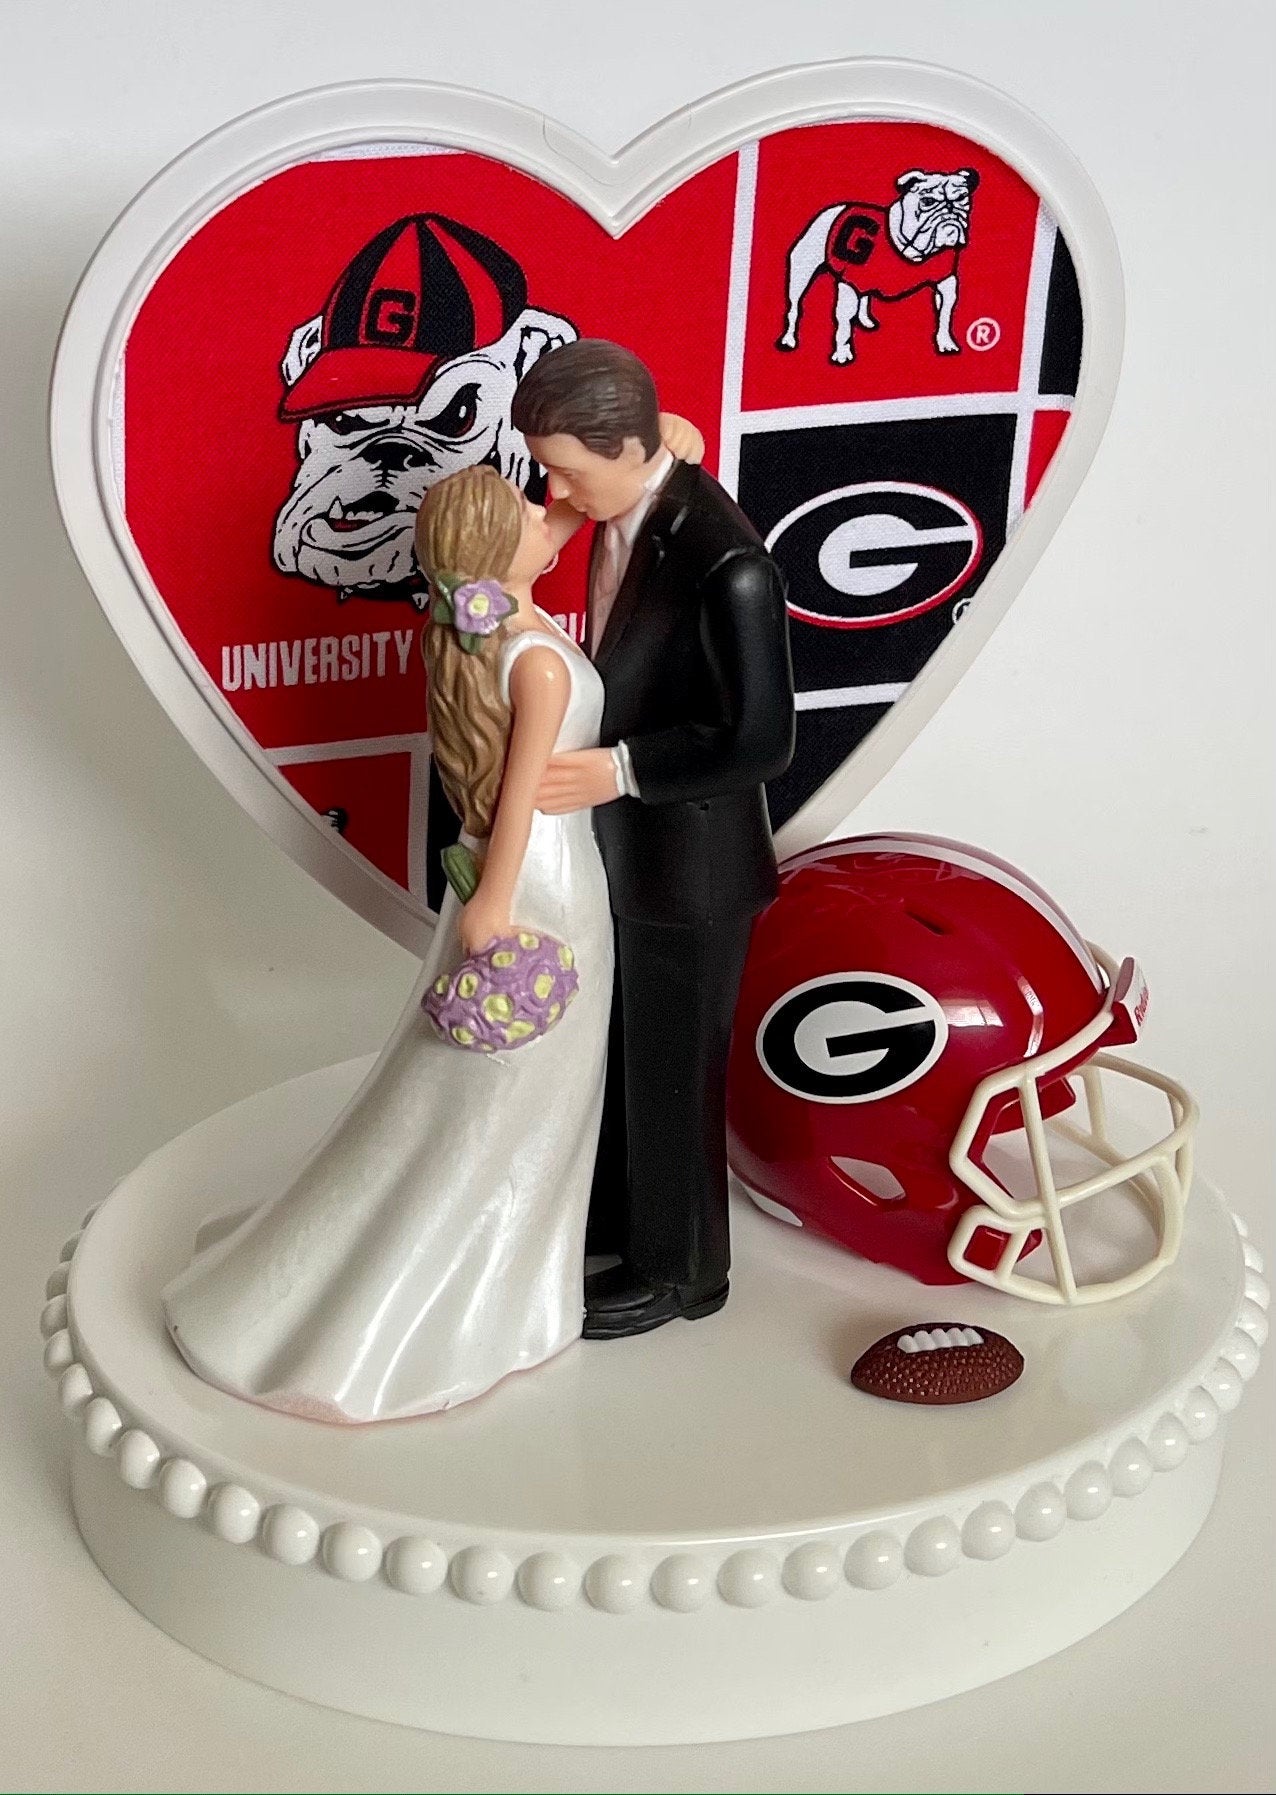 Wedding Cake Topper Georgia Bulldogs Football Themed UGA Gorgeous Long-Haired Bride Groom Unique Groom's Cake Top Reception Bridal Shower